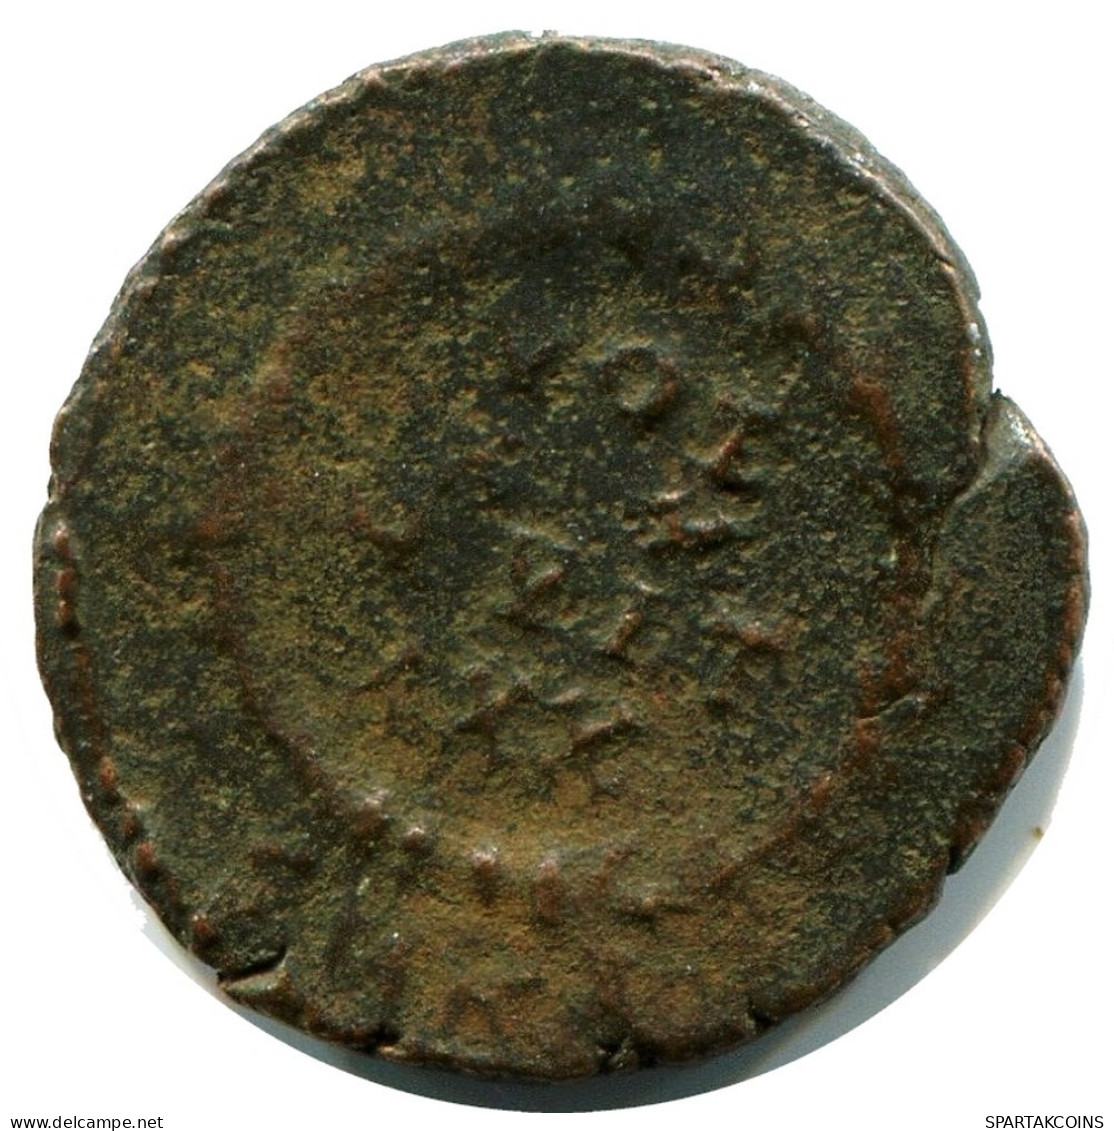 CONSTANS MINTED IN CYZICUS FROM THE ROYAL ONTARIO MUSEUM #ANC11668.14.E.A - Der Christlischen Kaiser (307 / 363)